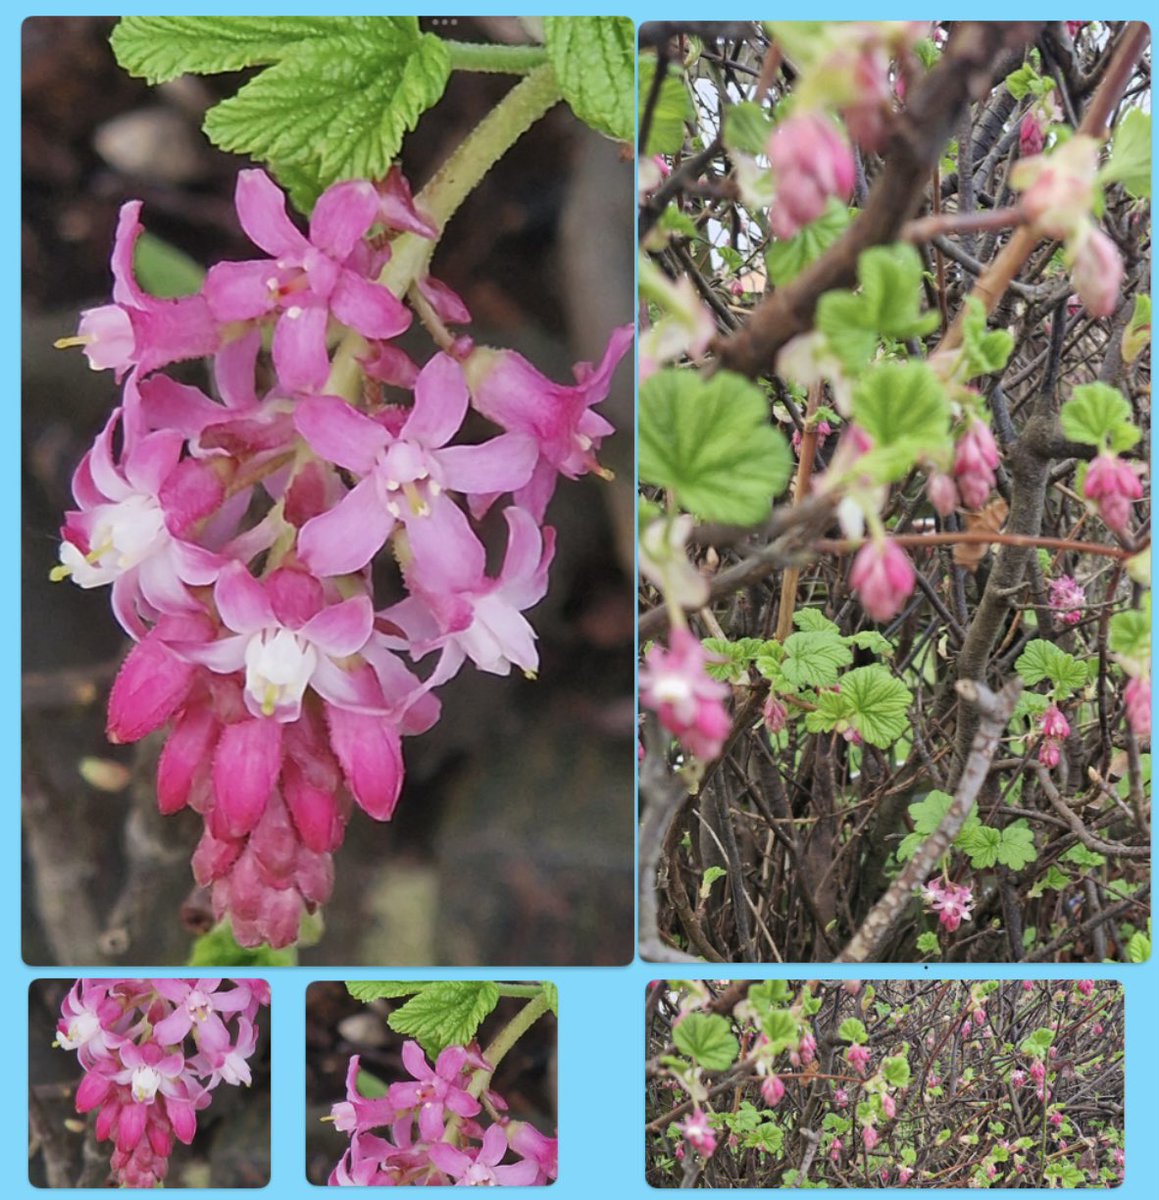 #GoodMorningEveryone   #HappyFriday   An unbelievably quick week. Lovely to see the Redcurrant blossoming again   #PinkFriday  #FridayFun  #FiveOnFriday  #FlowersOfTwitter